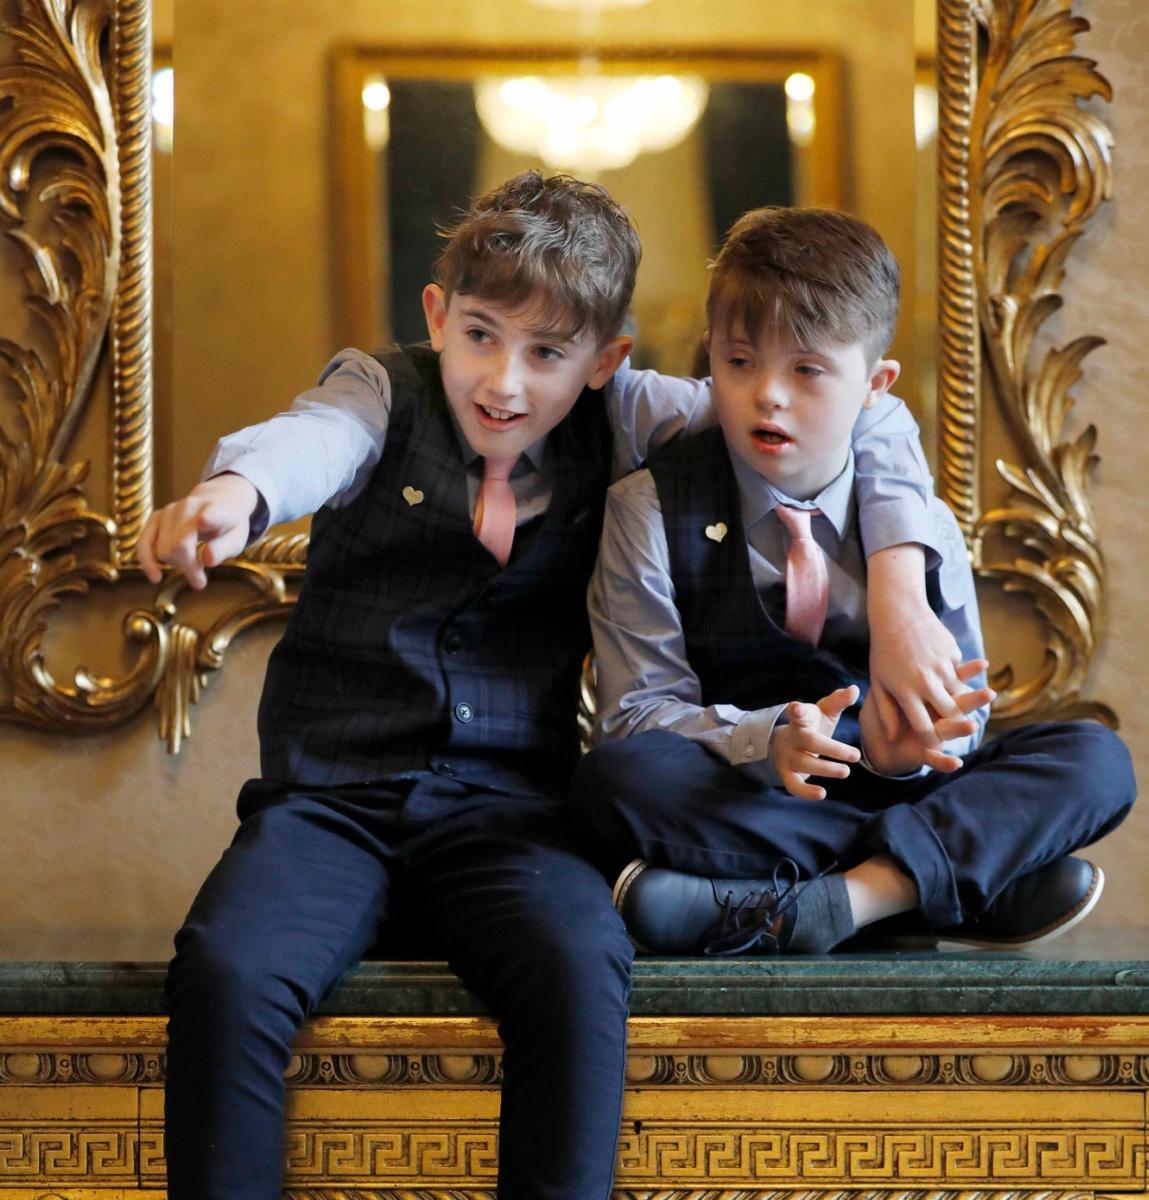 Ten-year-old wins Young Carers Award for his devotion to twin brother